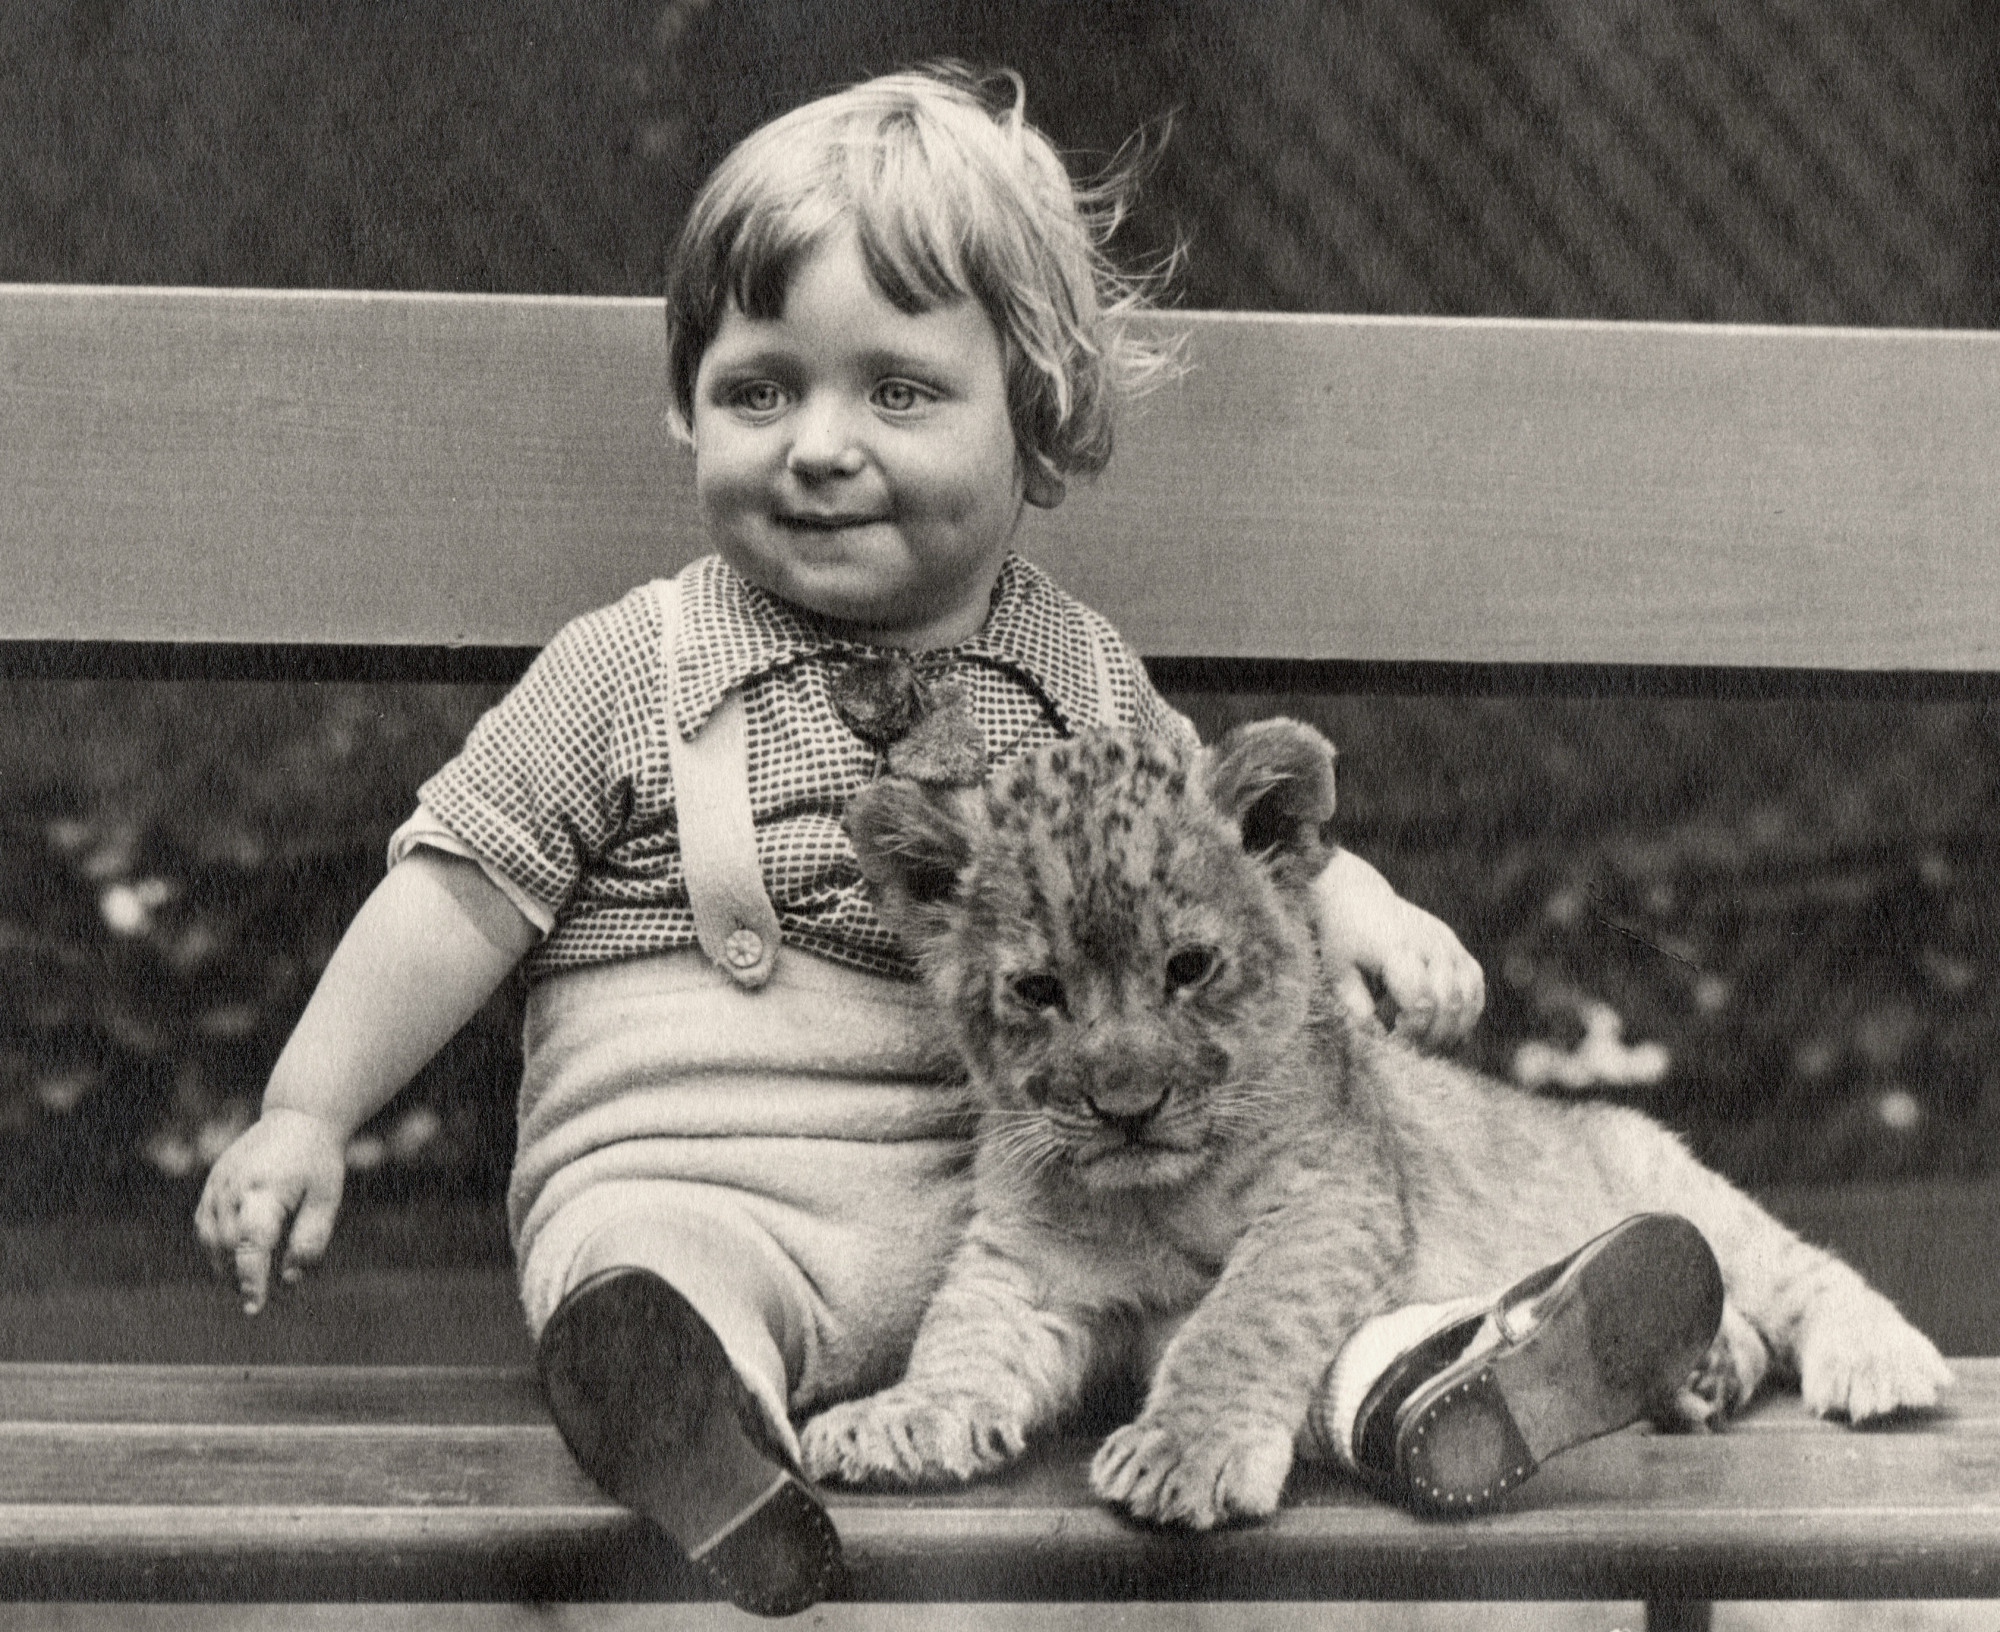 A little boy sits smiling on a bench with a lion cub on his lap.